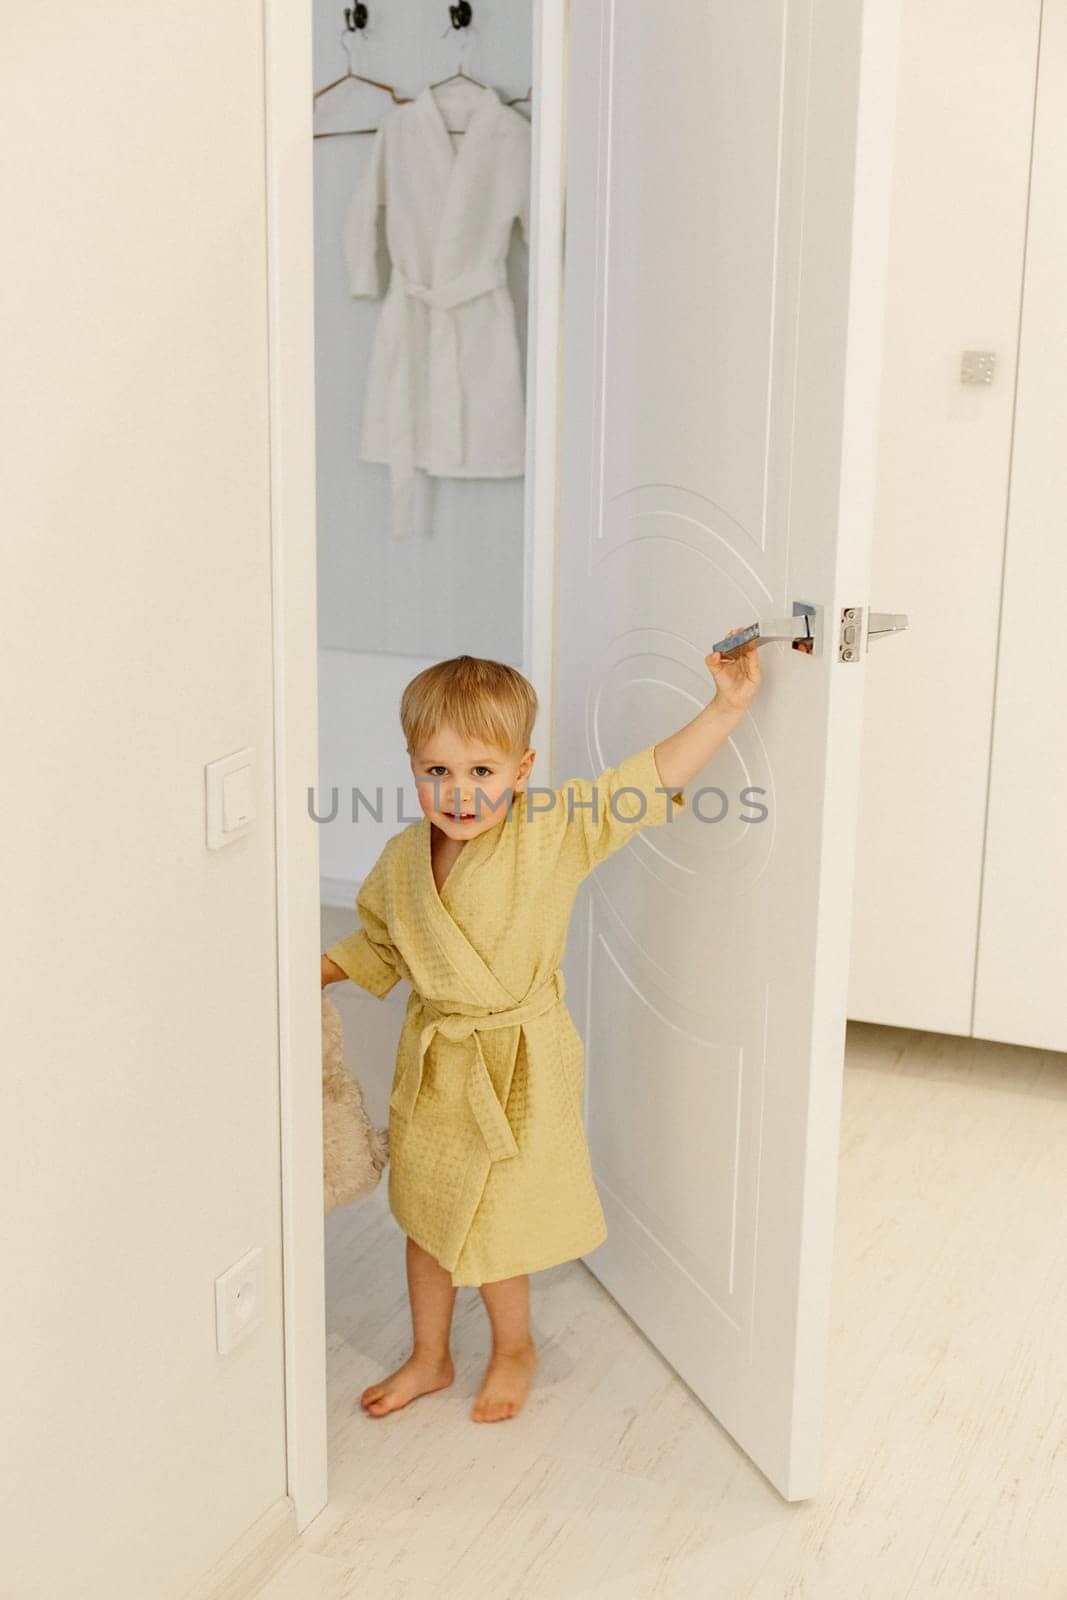 A boy in a yellow bathrobe stands at the entrance to the bathroom, smiling.